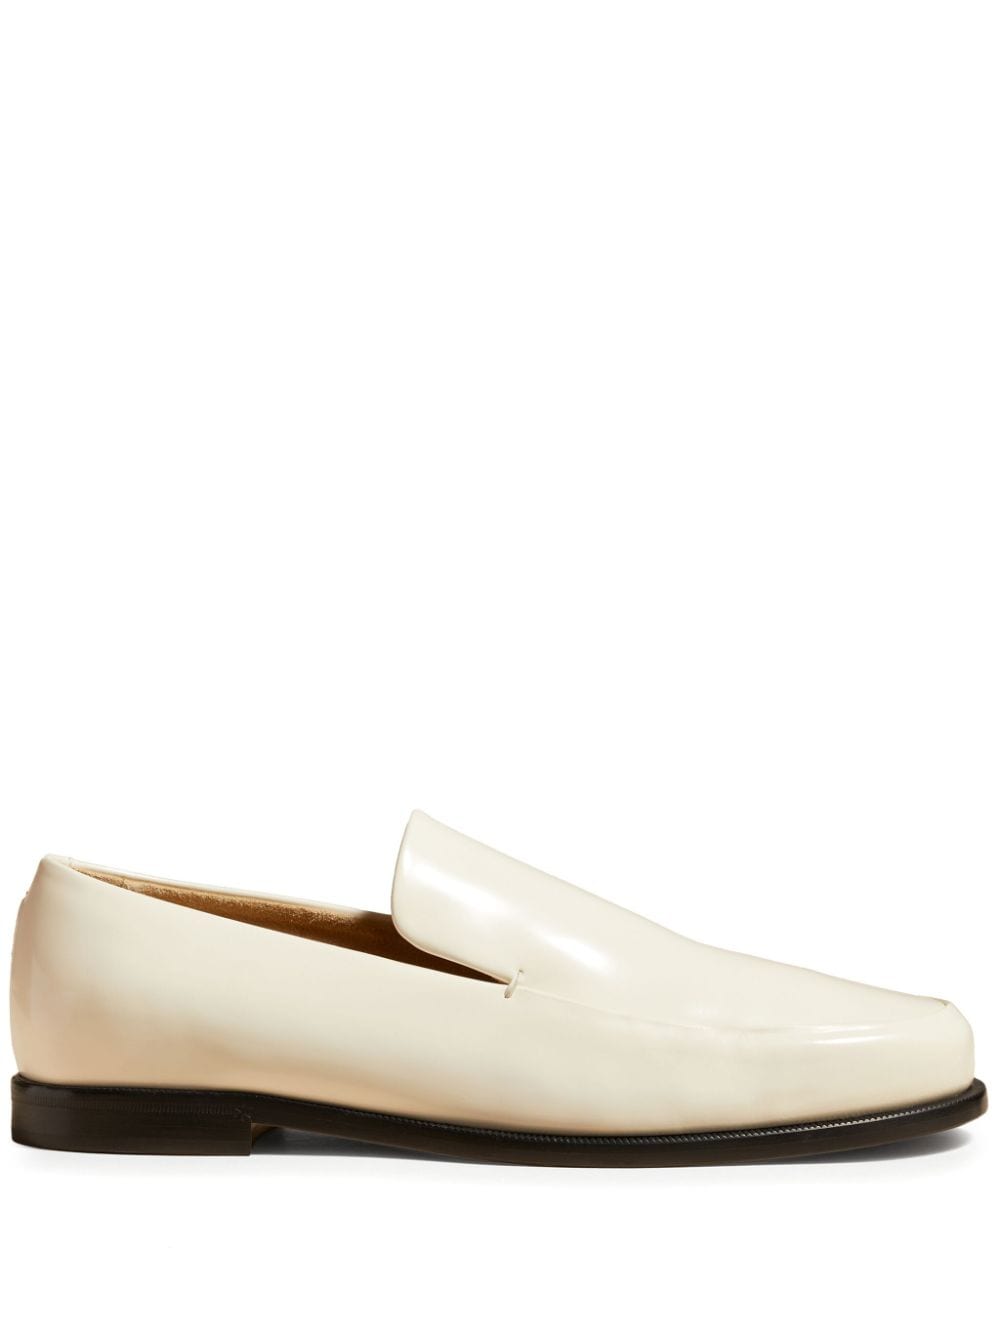 Alessio leather loafers